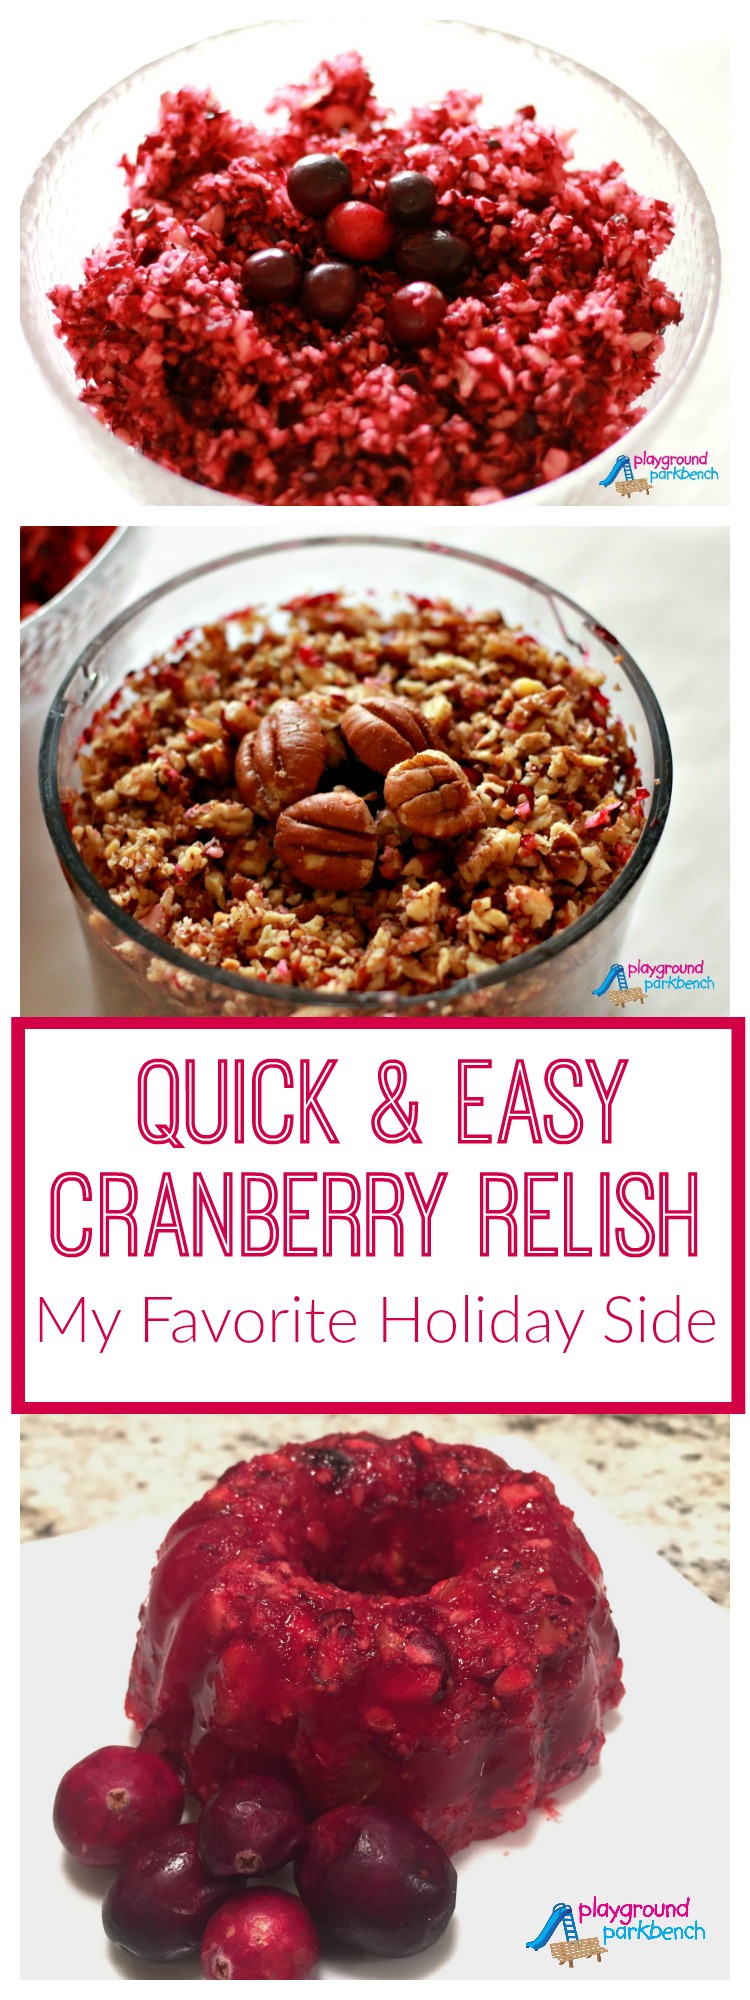 Quick & Easy Cranberry Relish - Perfect Holiday Side Dish